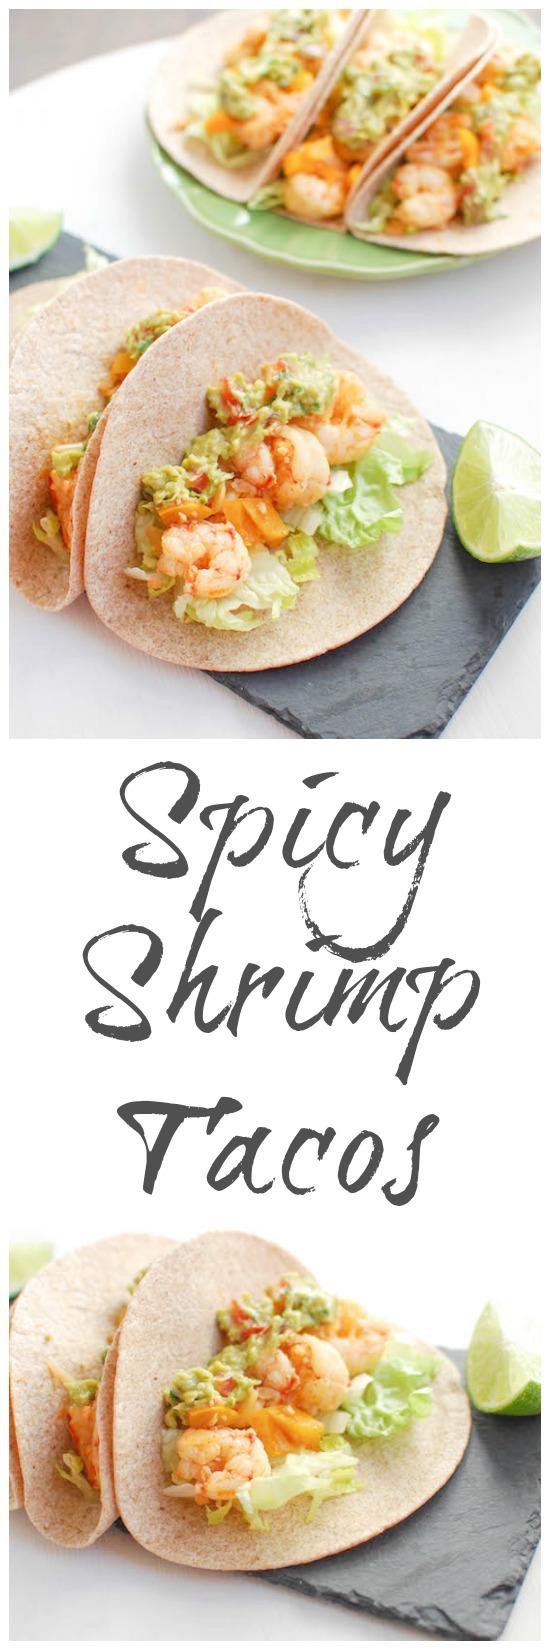 Slightly sweet and full of spice, these Spicy Shrimp Tacos are ready in 15 minutes, making them the perfect weeknight dinner!